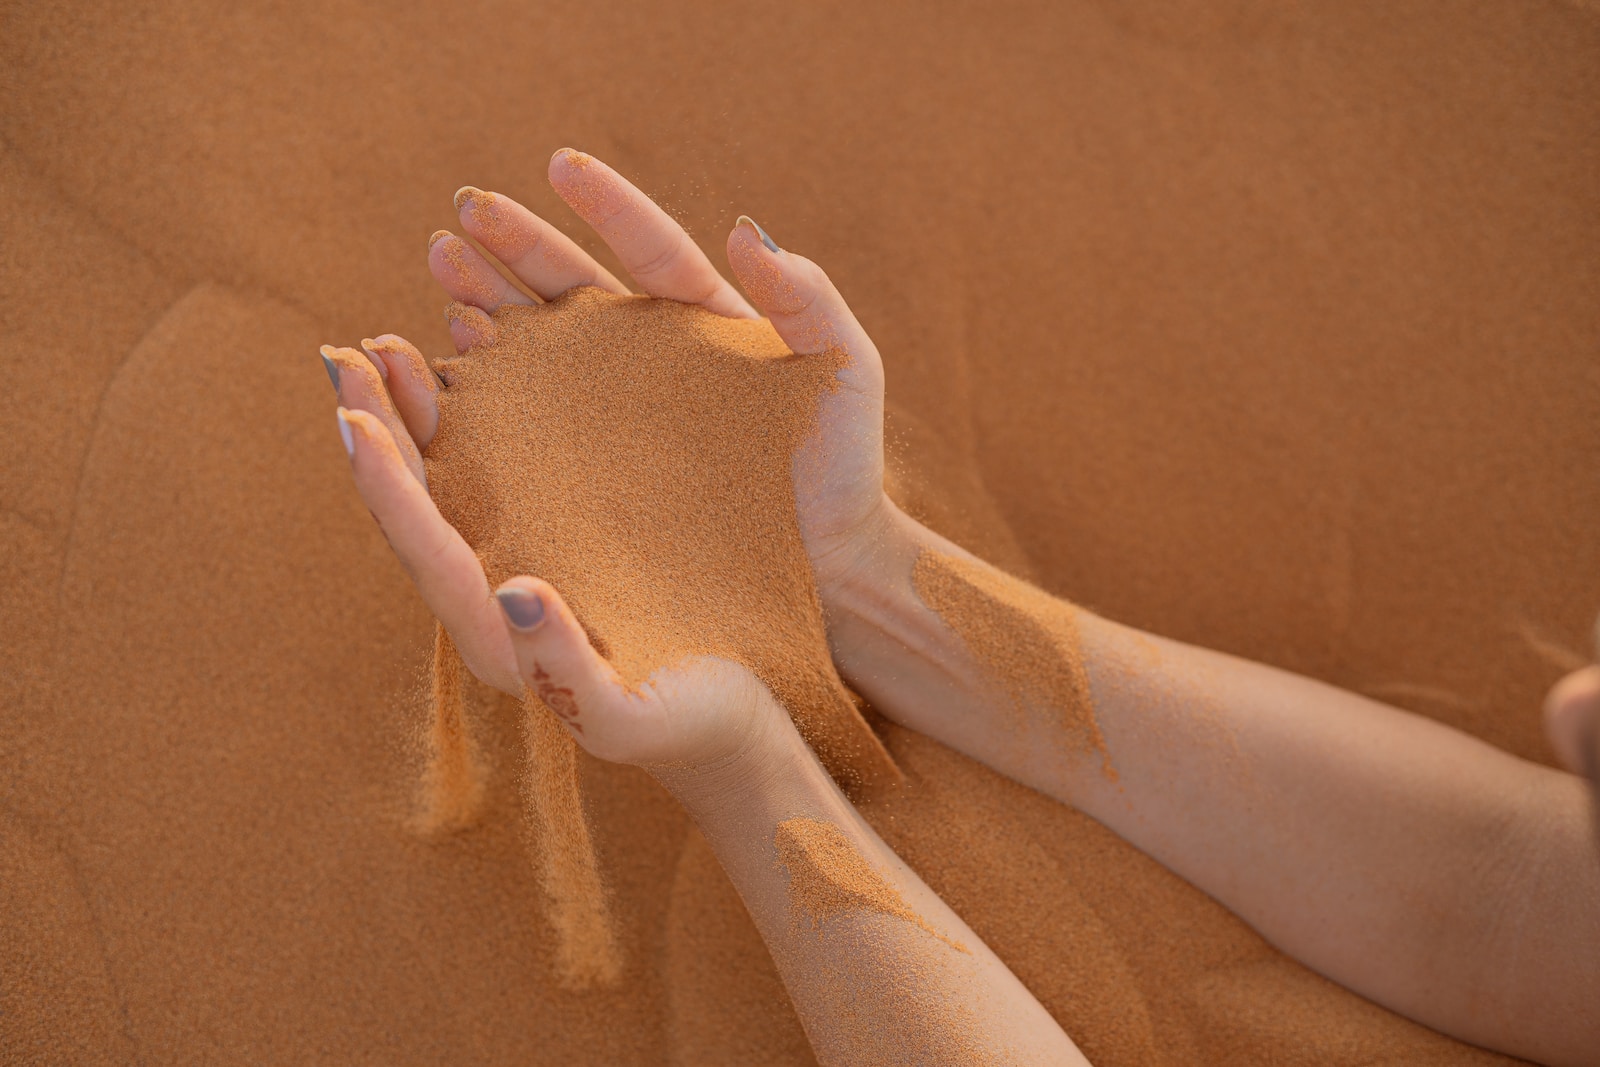 persons feet on brown sand